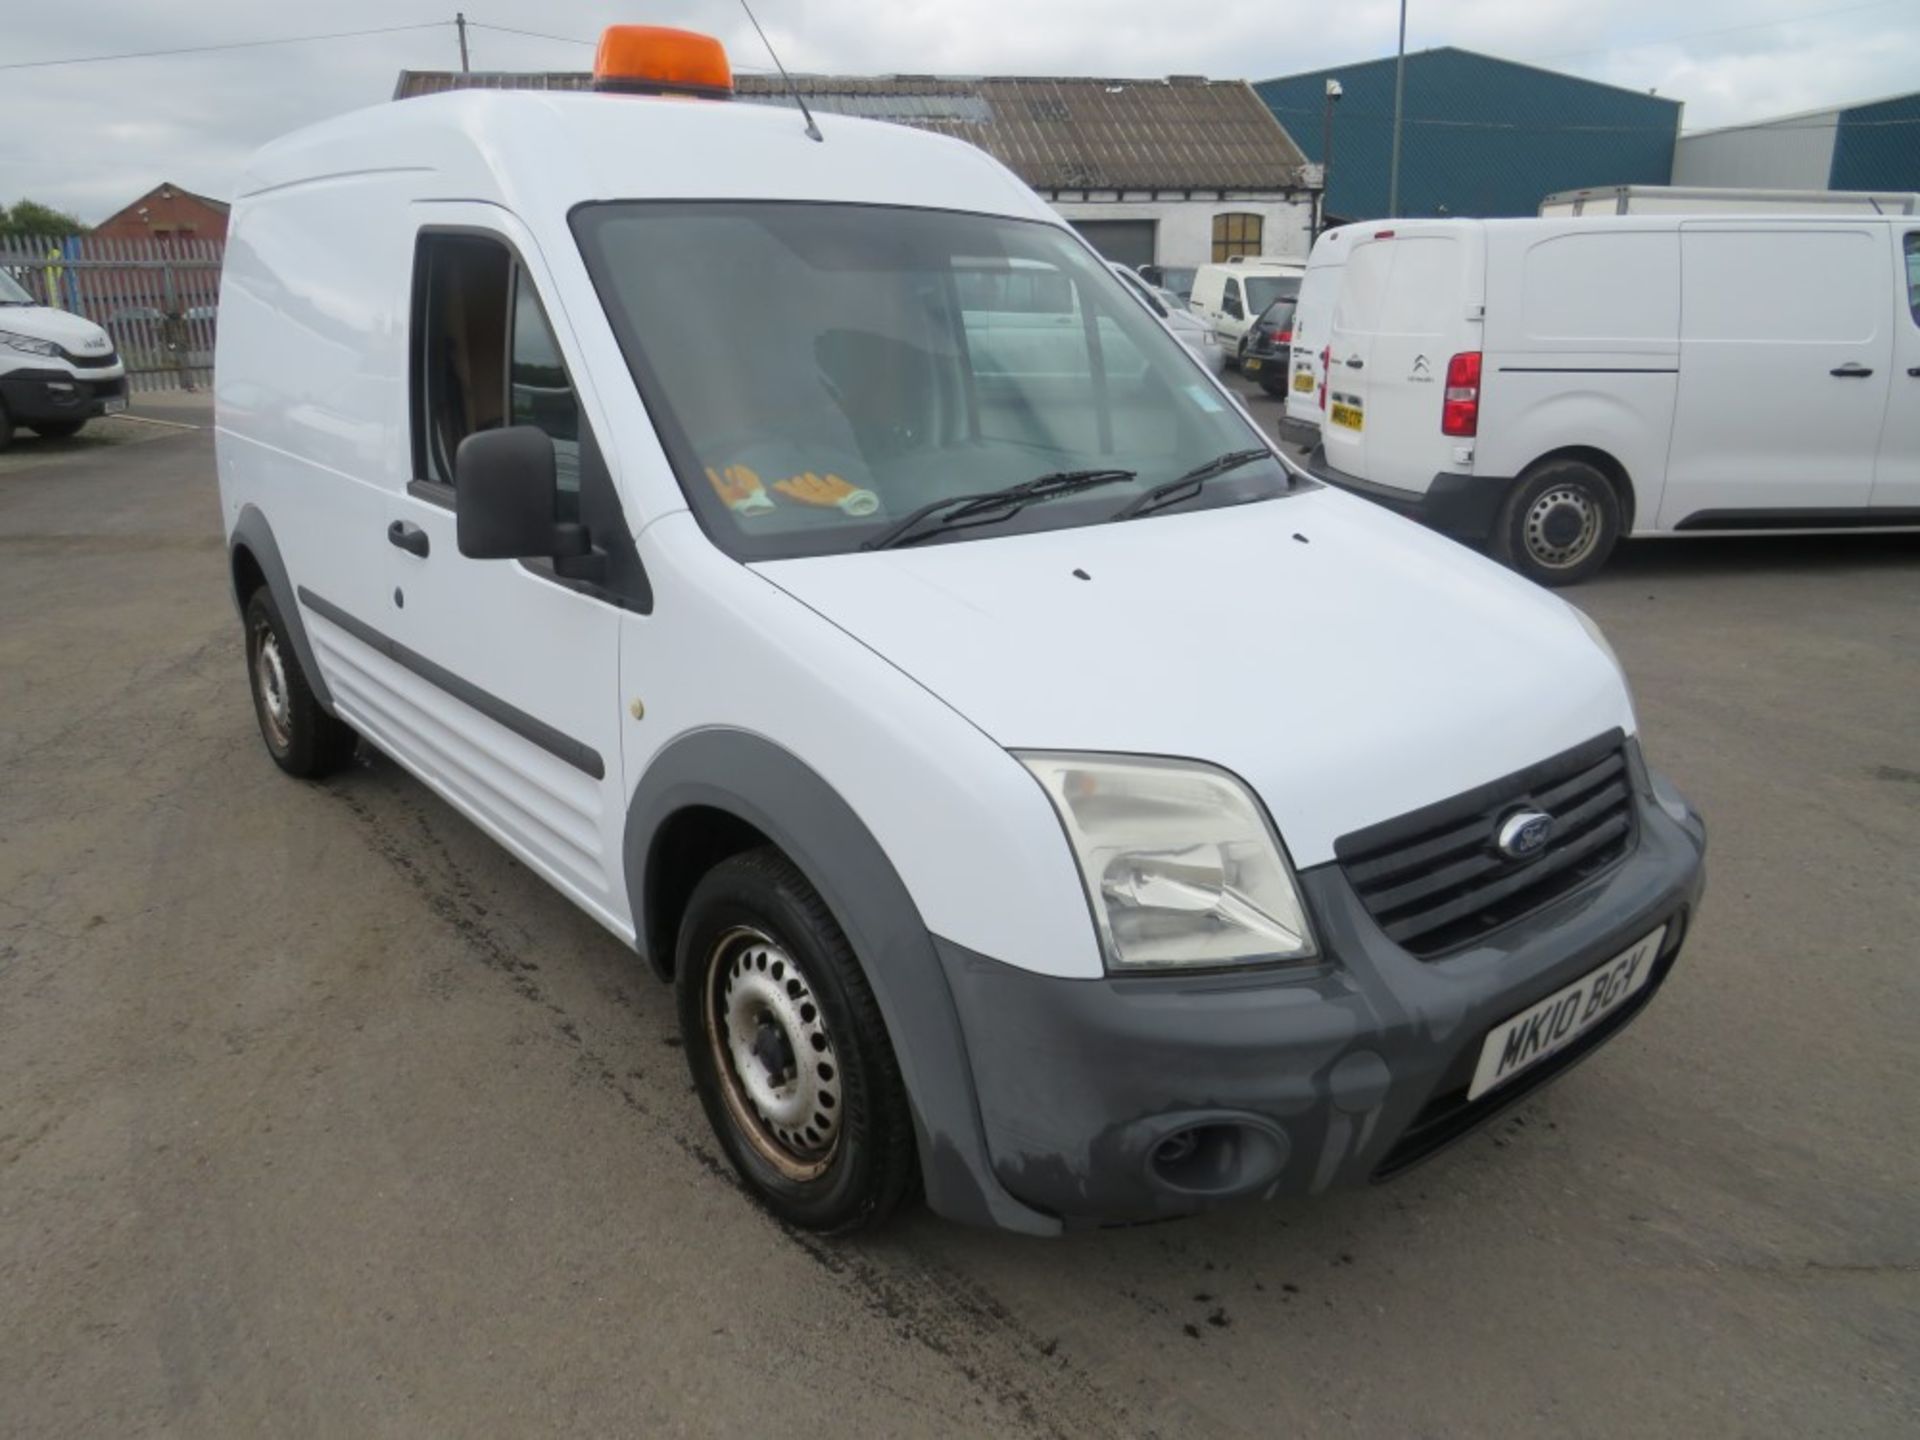 10 reg FORD TRANSIT CONNECT 90 T230 (DIRECT COUNCIL) 1ST REG 04/10, TEST 05/22, 72112M, V5 HERE, 1